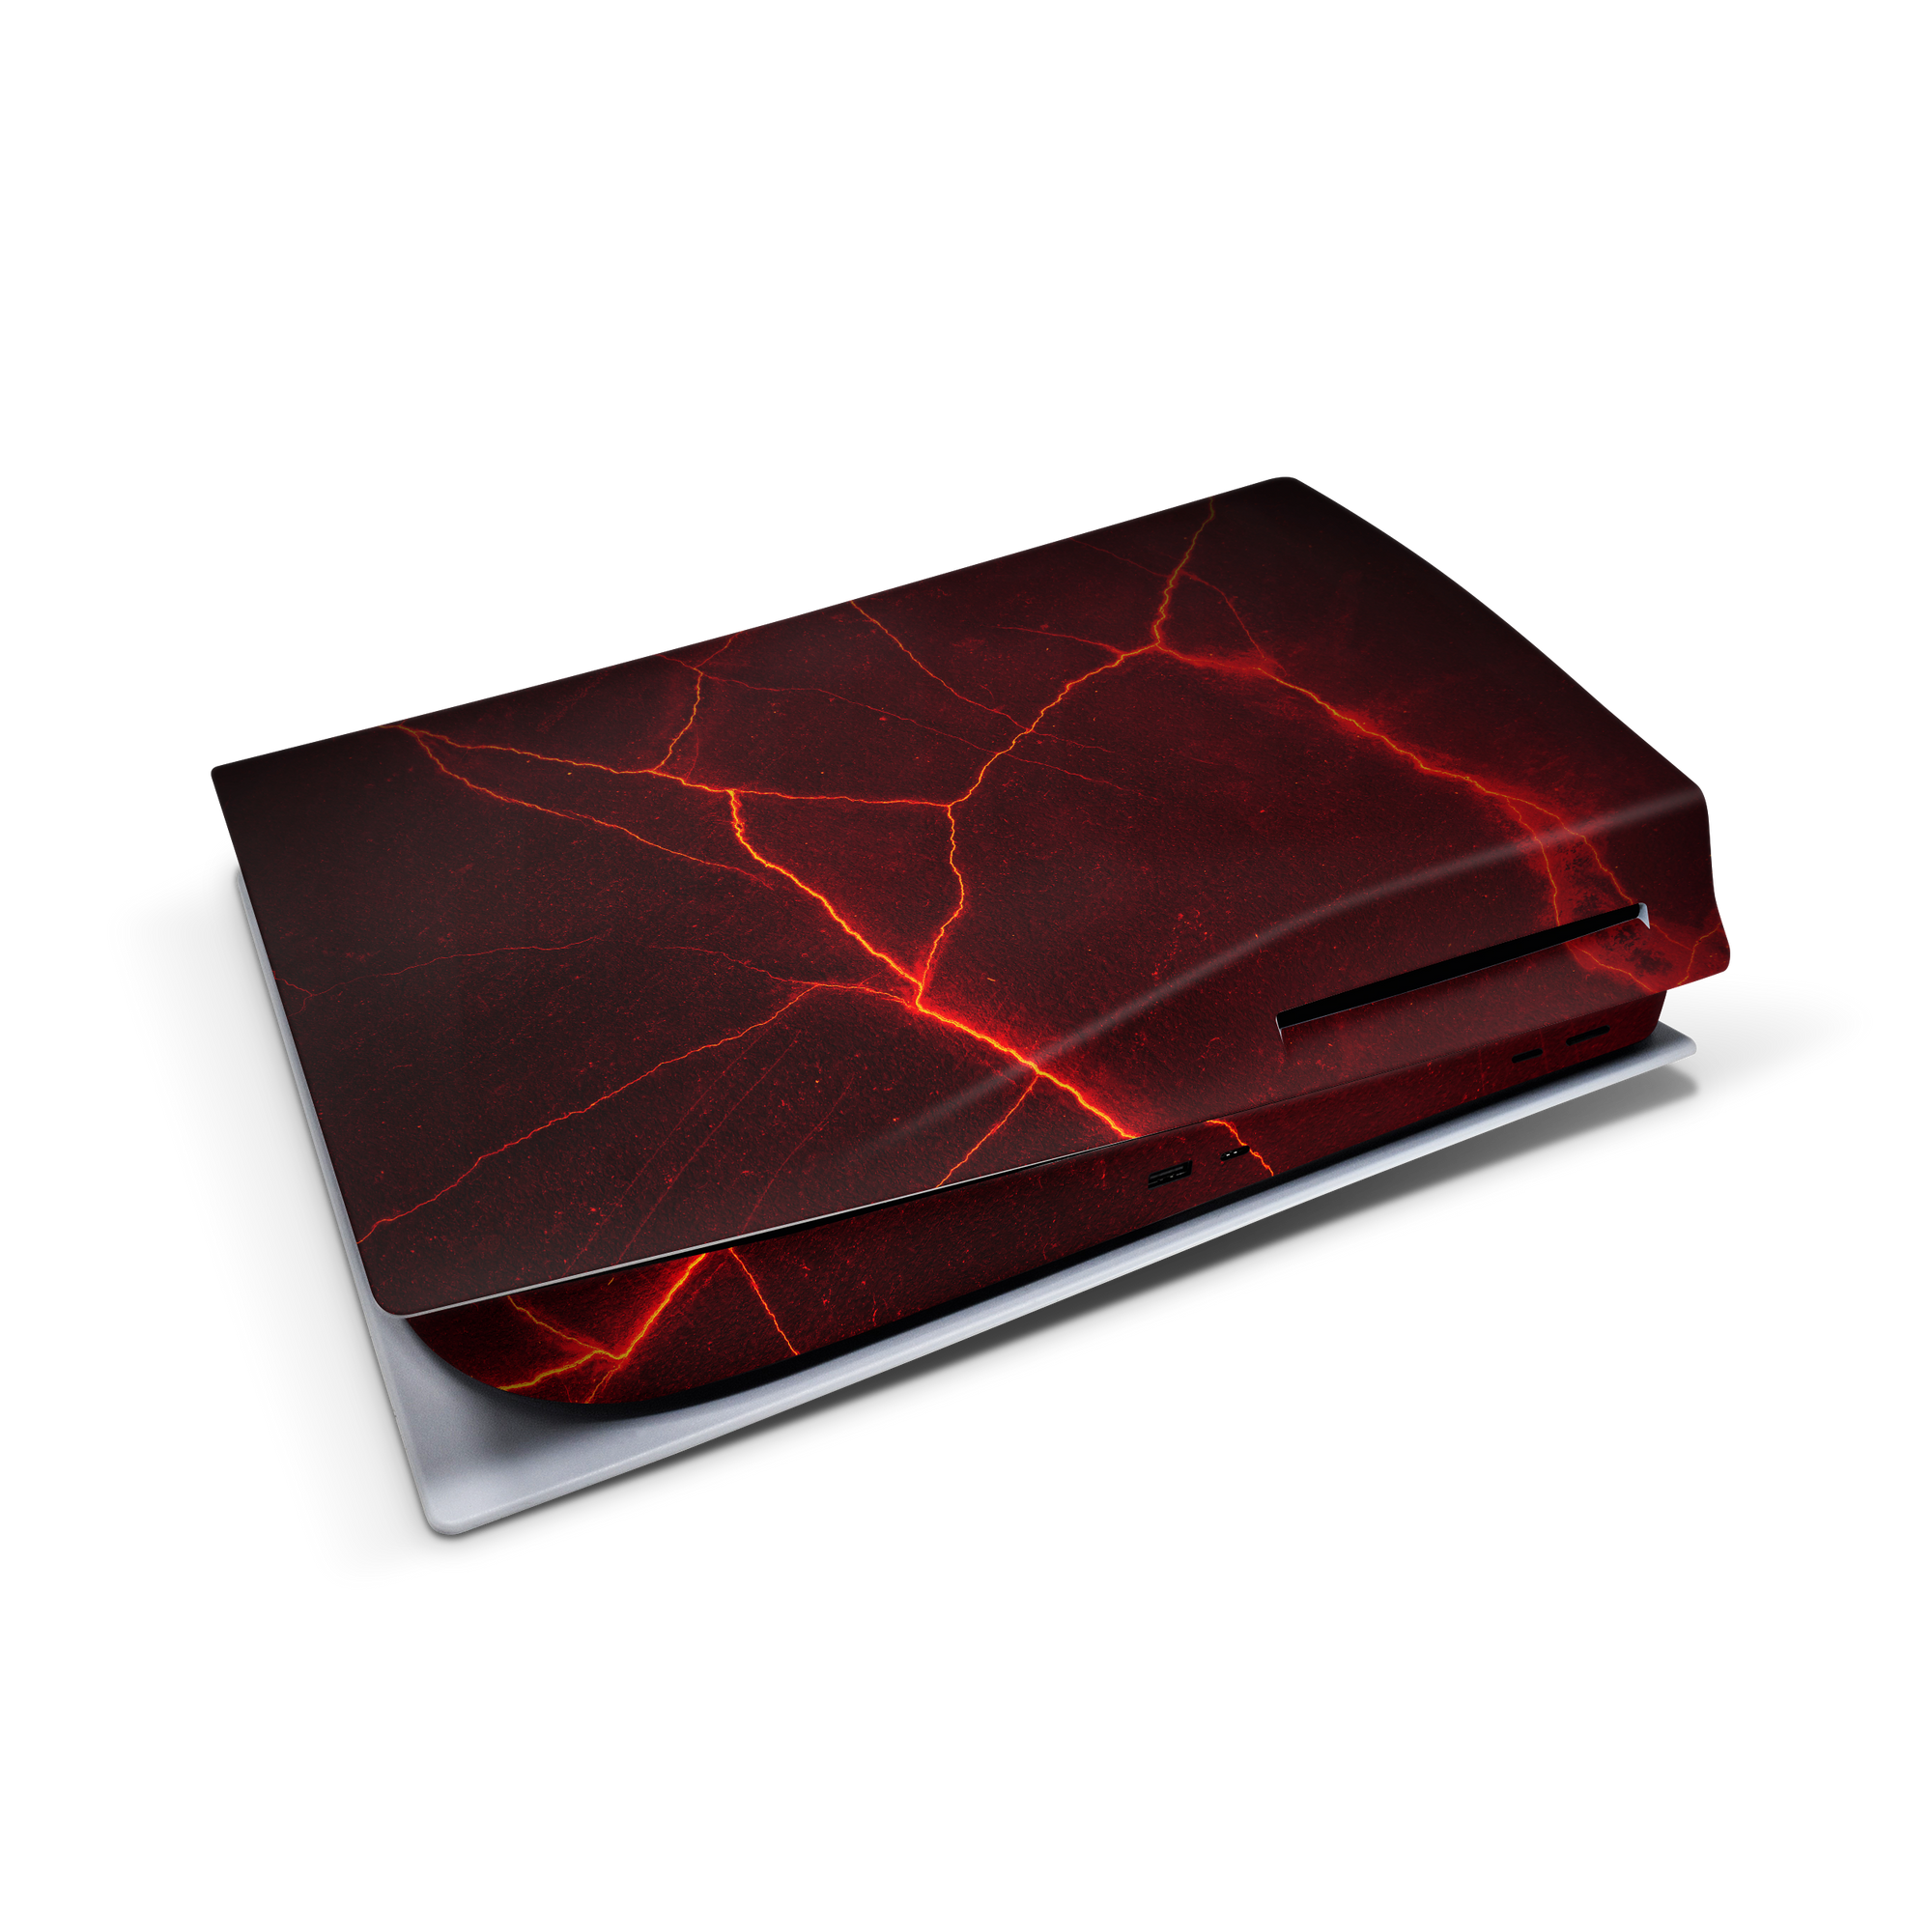 cracked earth ps5 console skin vinyl wrap sticker